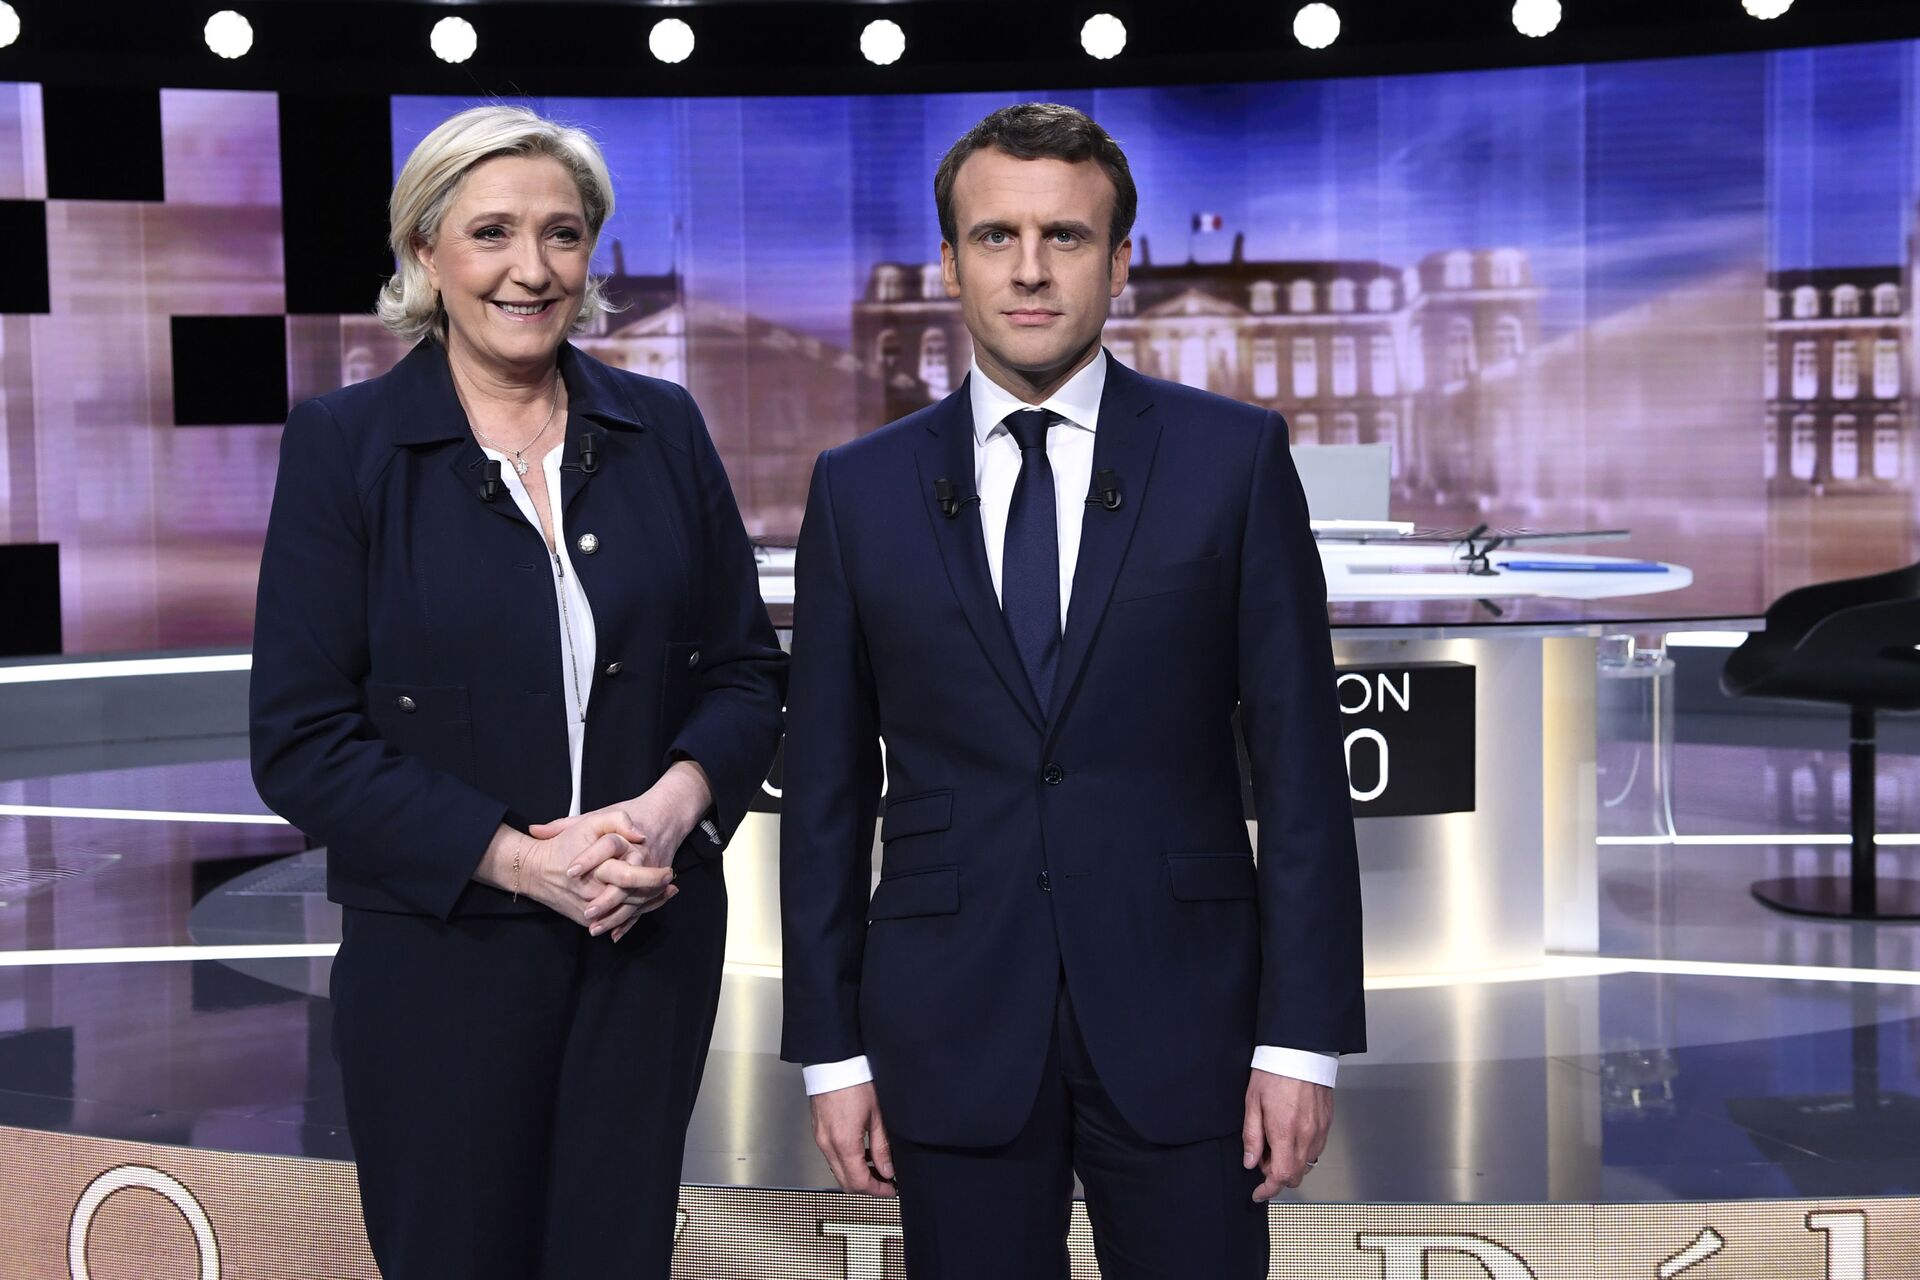 French presidential election candidate for the far-right Front National party, Marine Le Pen, 2nd left, and French presidential election candidate for the En Marche ! movement, Emmanuel Macron, right, pose prior to the start of a live broadcast face-to-face televised debate in La Plaine-Saint-Denis, north of Paris, France, Wednesday, May 3, 2017 as part of the second round election campaign - Sputnik International, 1920, 21.04.2022